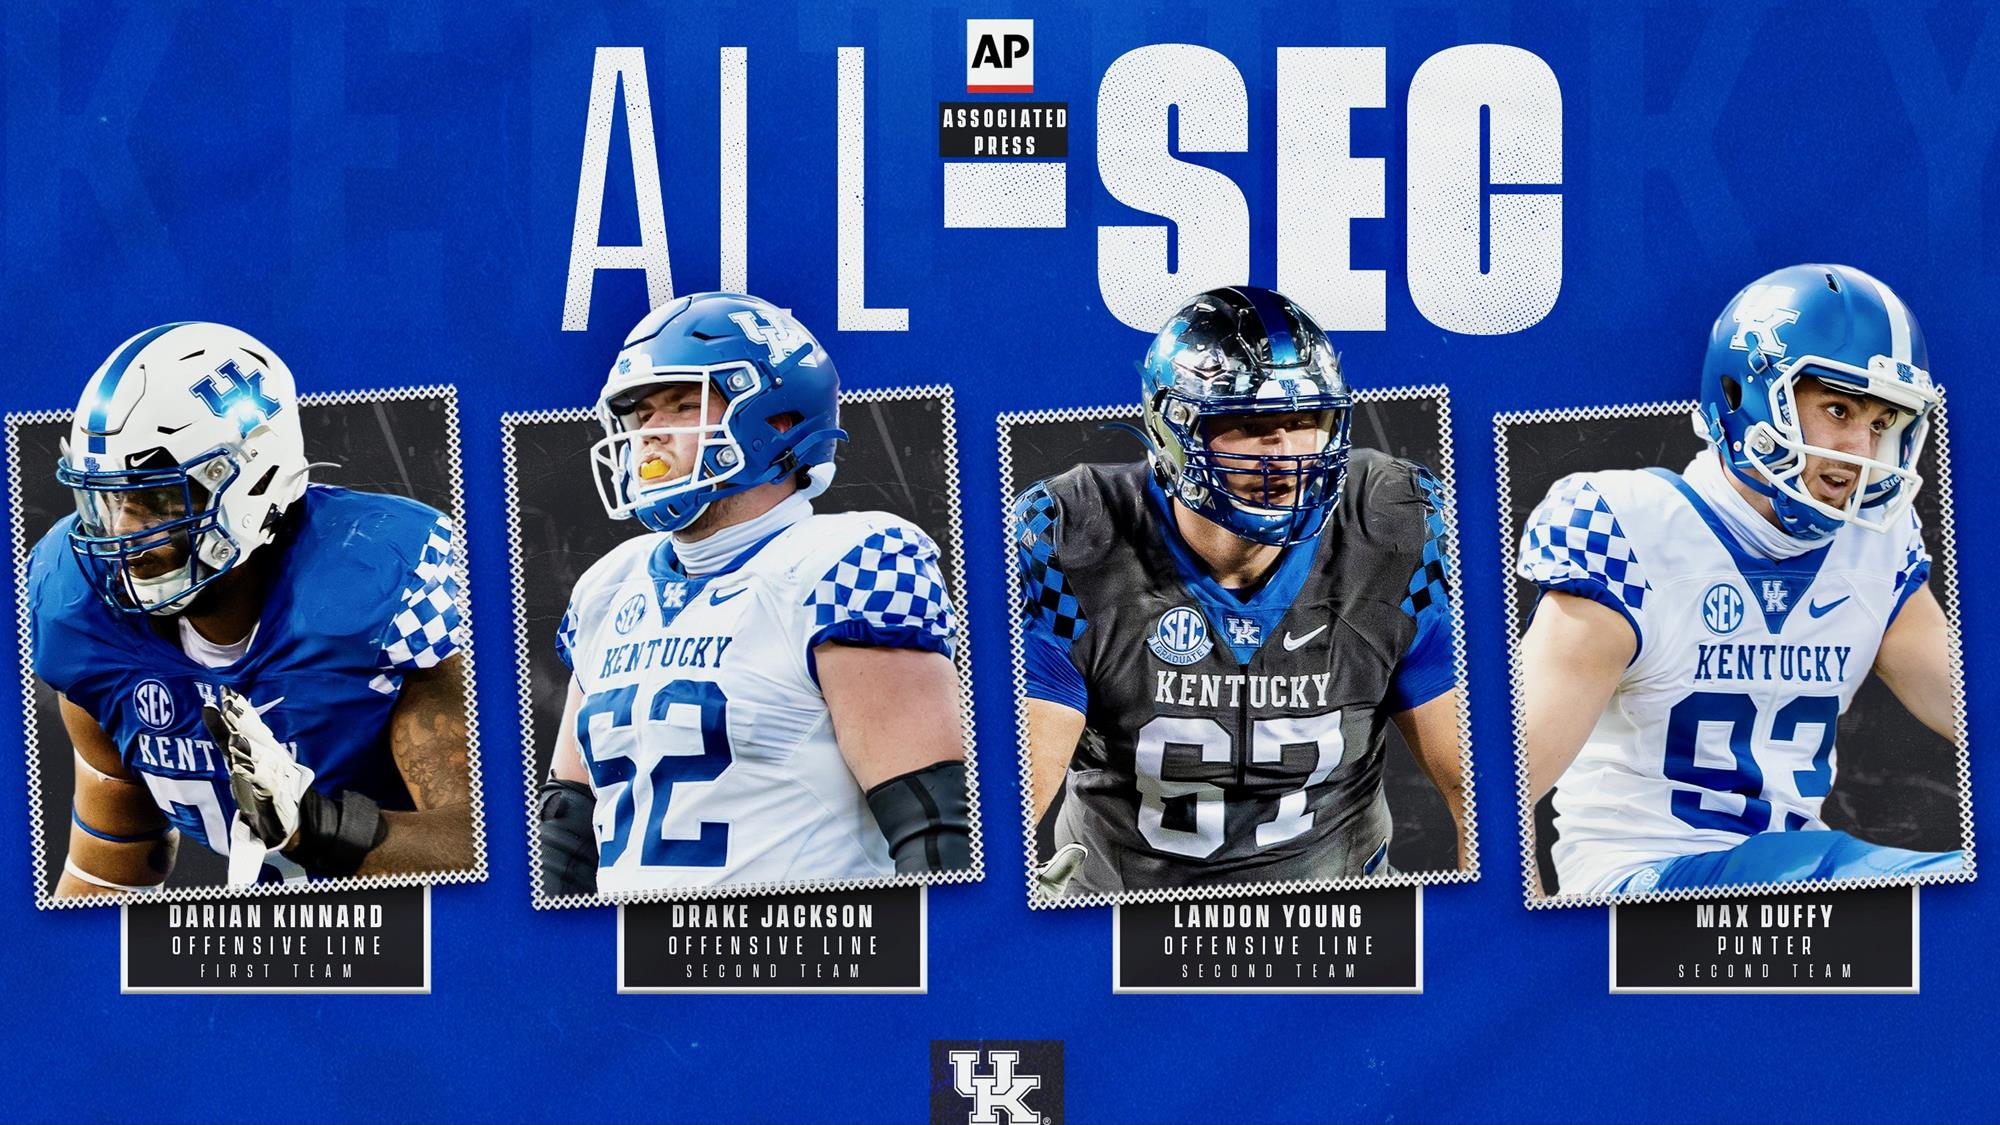 Four Wildcats Earn Associated Press All-SEC Honors